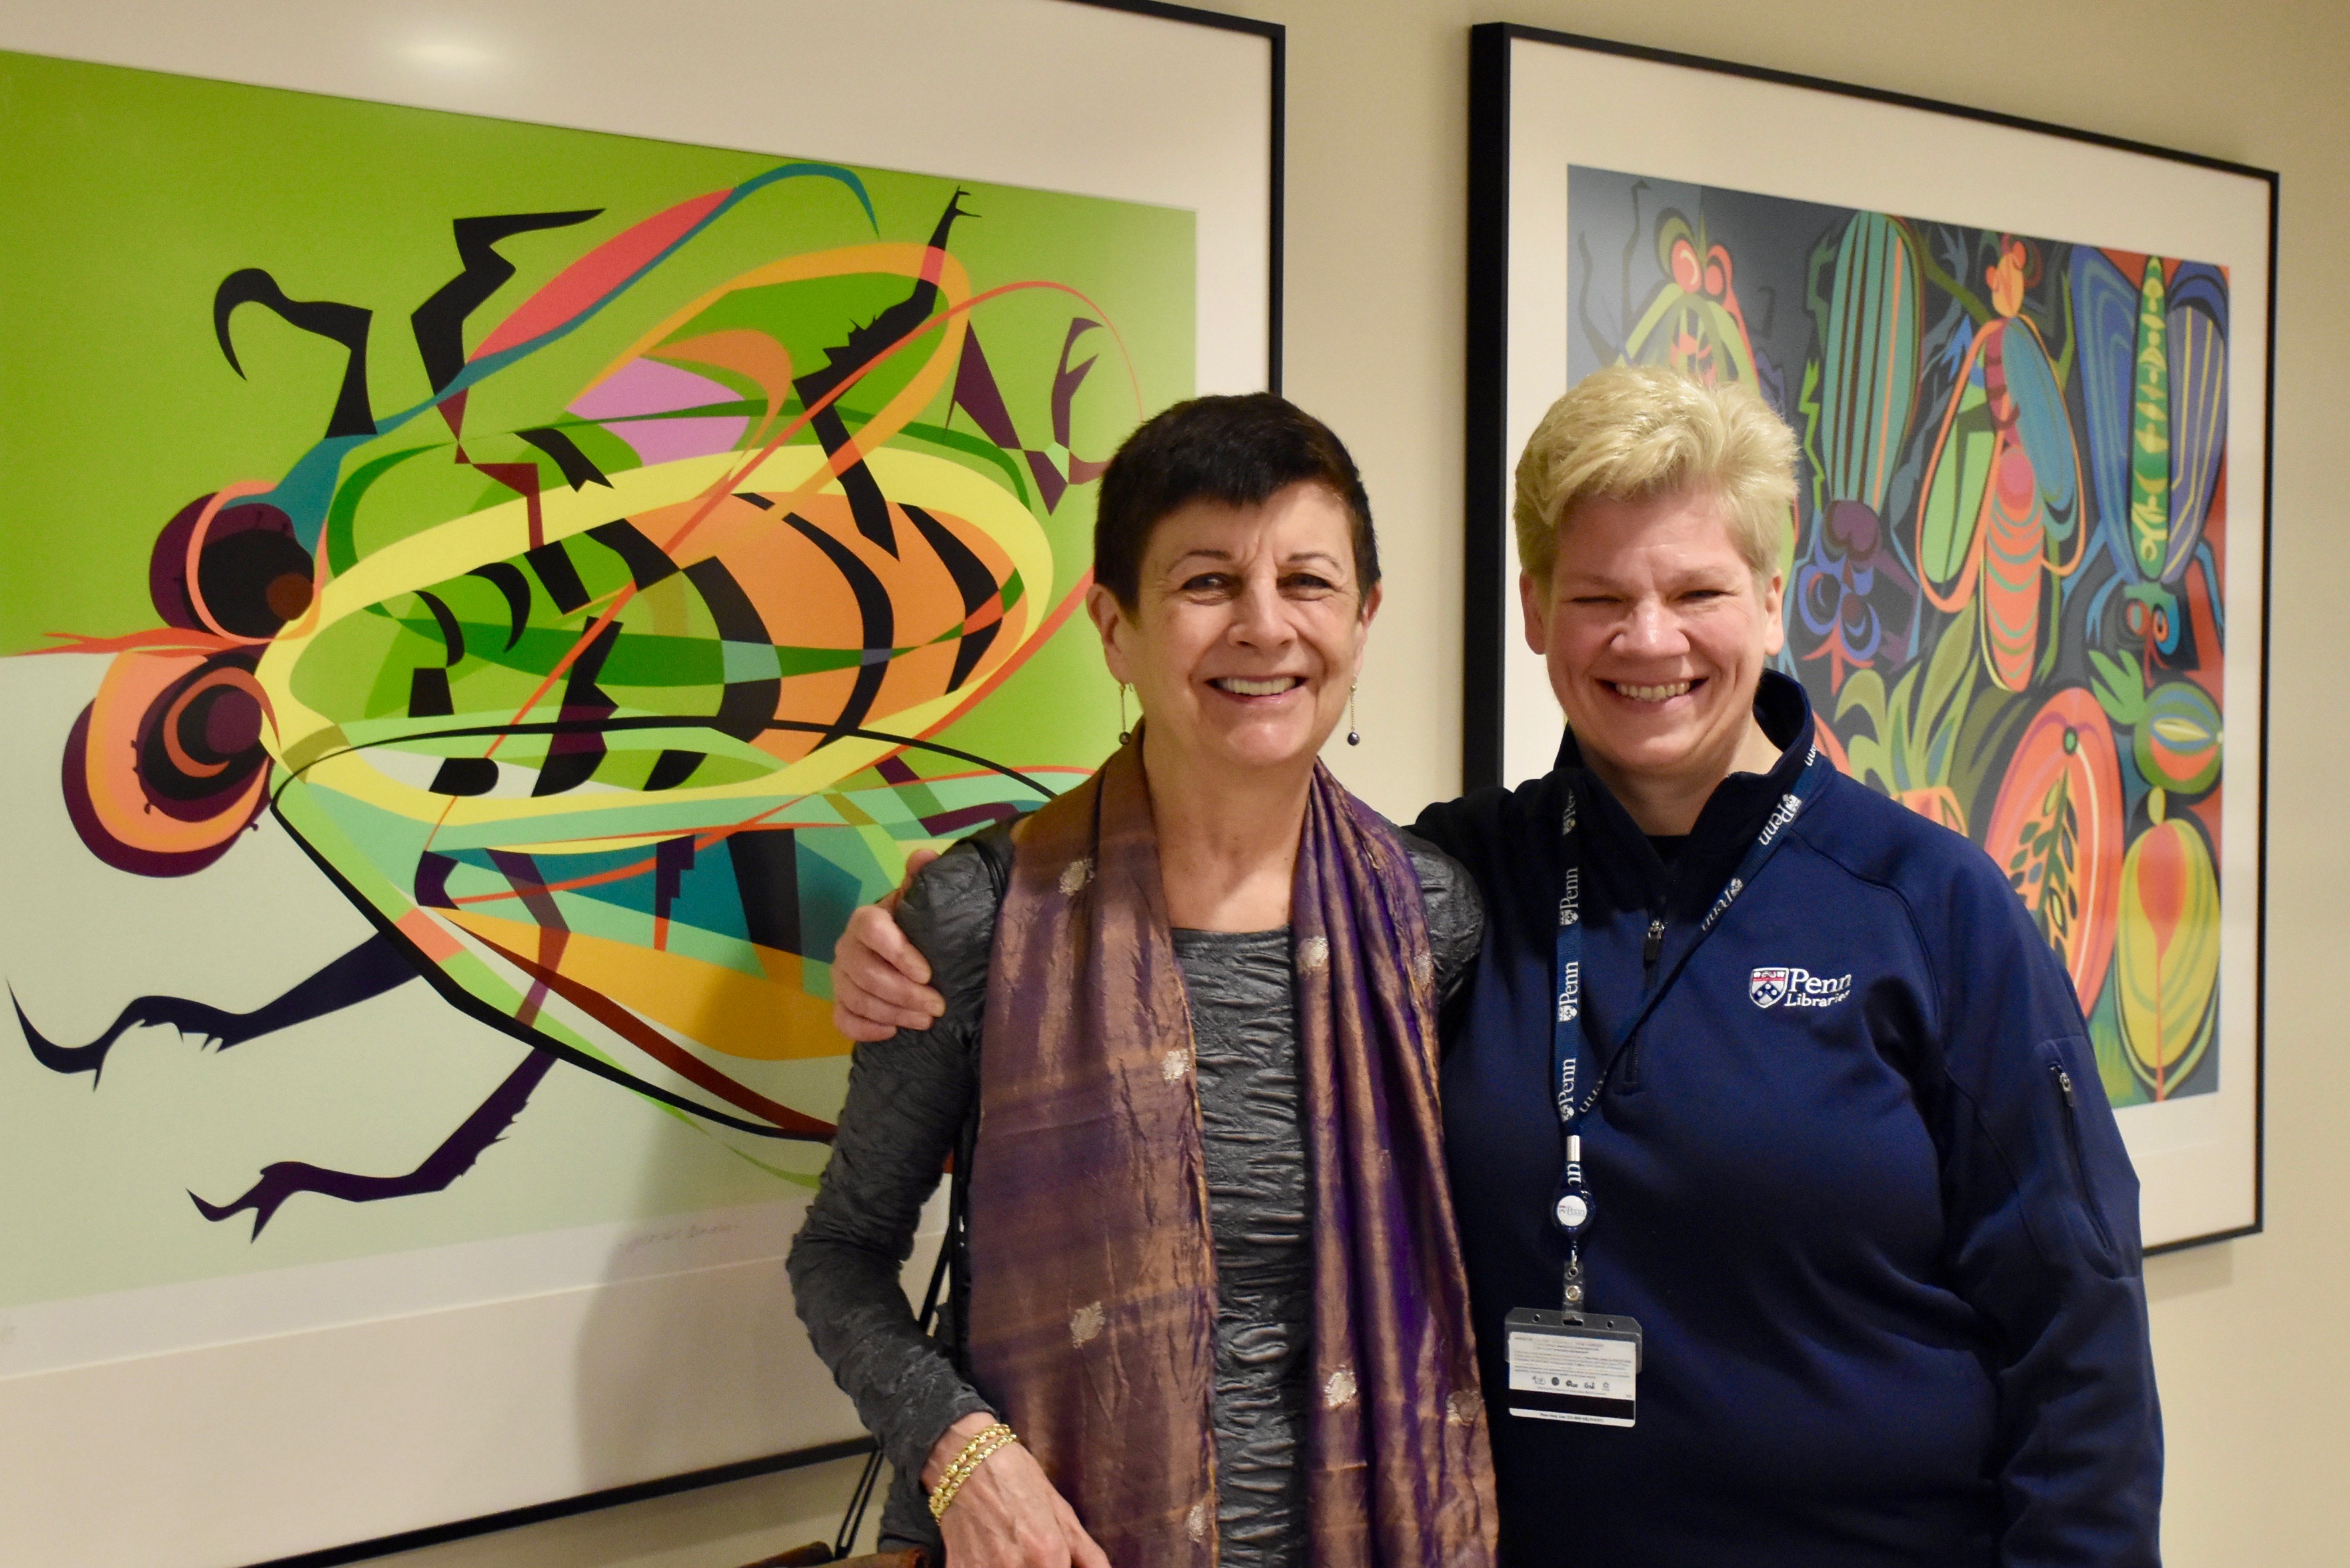 Penn-Libraries-Regan-Kladstrup-standing-with-alumna-Caroline-Schimmel-in-front-of-brightly-colored-prints-by-woman-Ecuadorian-artist-depicting-rainforest